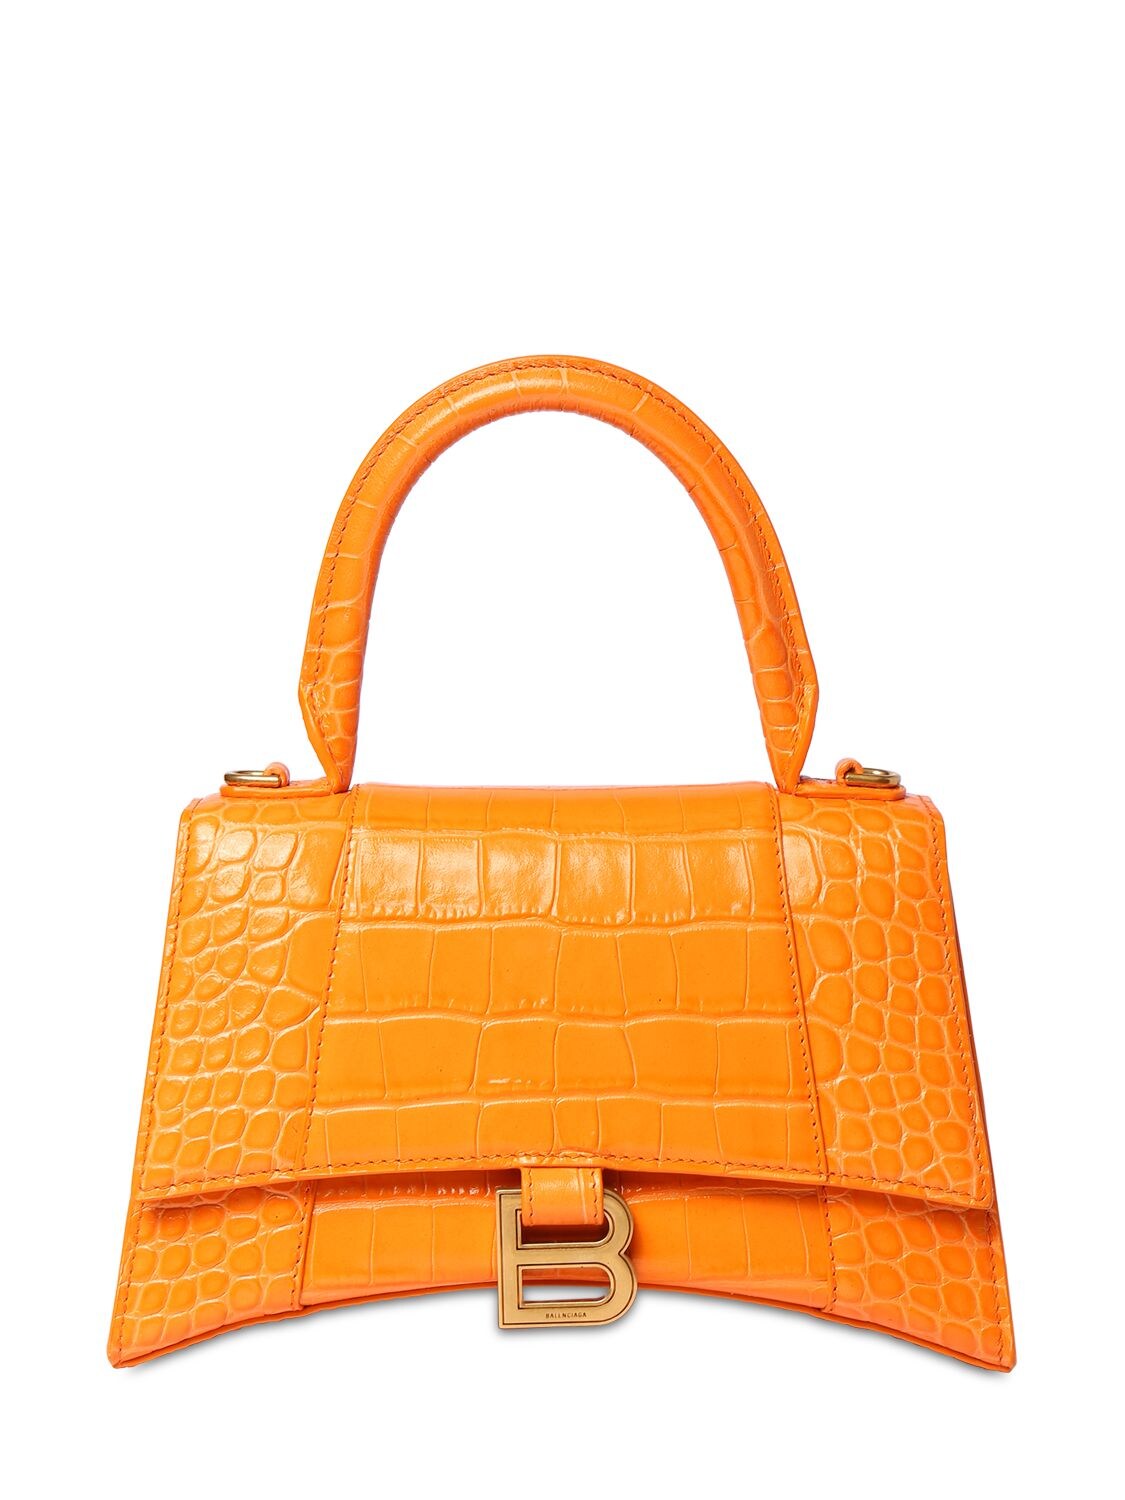 S hourglass croc embossed leather bag 